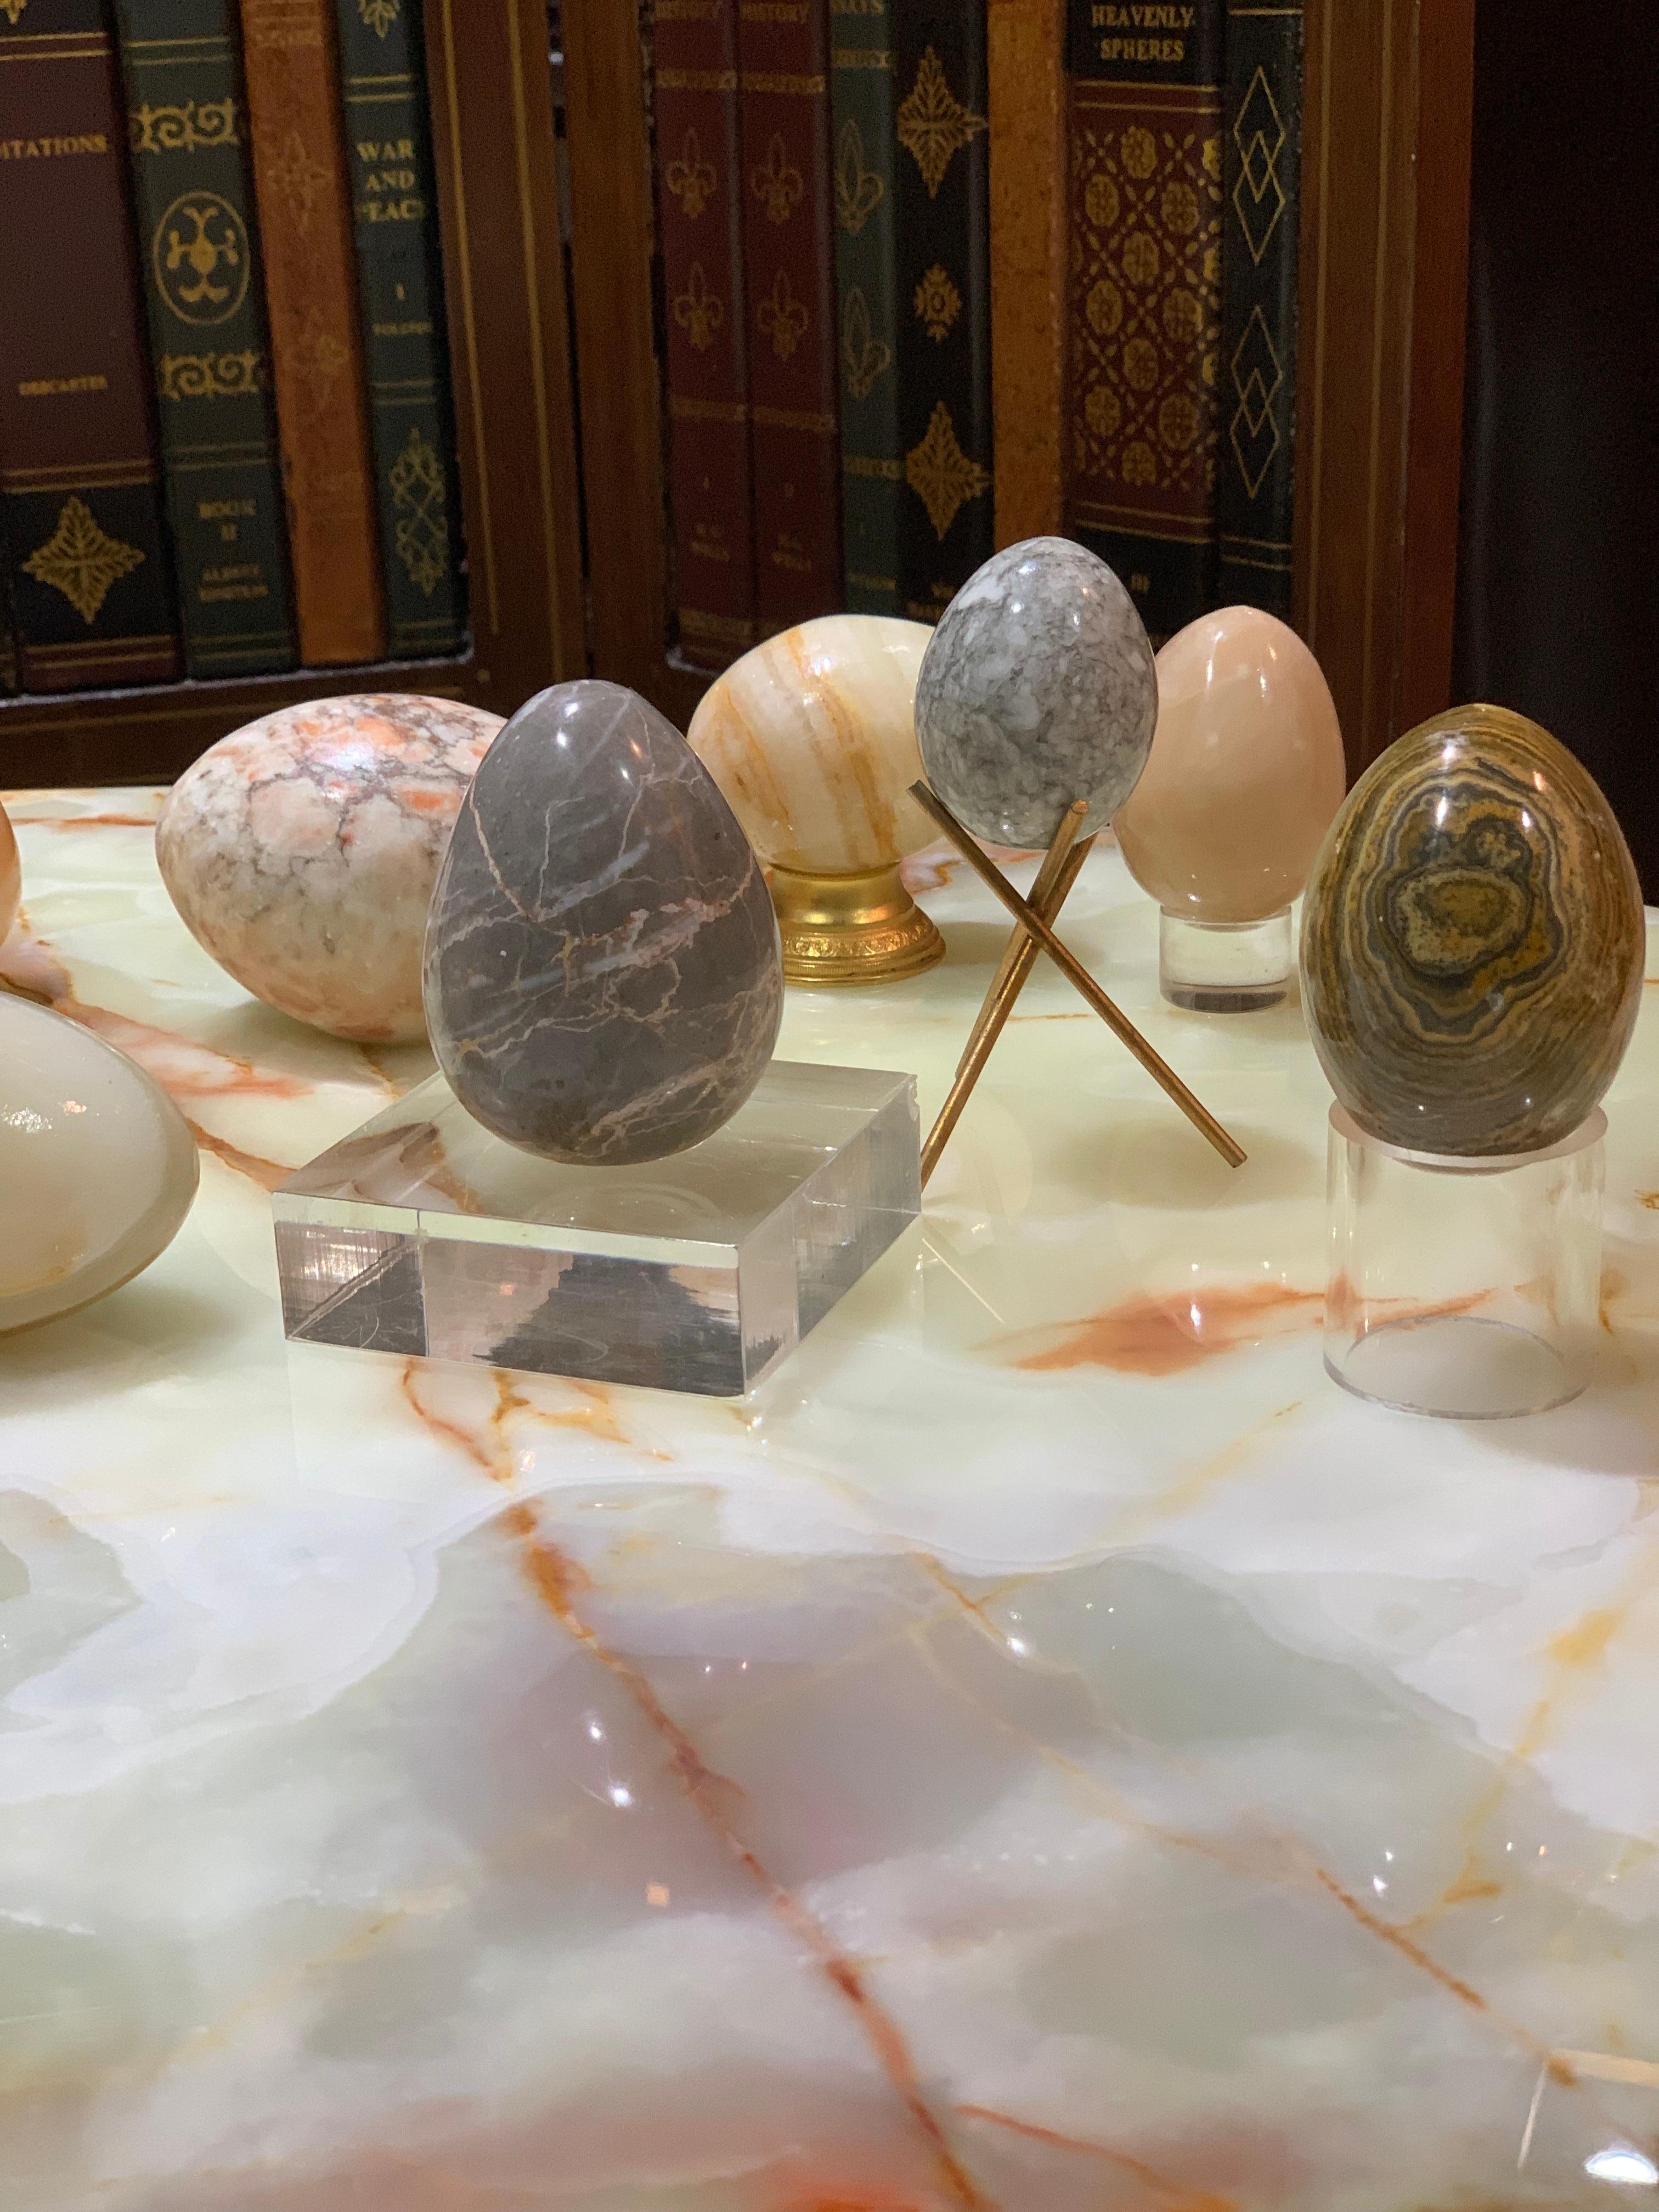 Organic modern hand carved stone egg sculptural set with brass and Lucite bases. Gorgeous three egg set, veined to perfection by Mother Nature and hand-burnished by midcentury artisans. 2 Lucite bases, 1 brass stand as well 3 stone eggs for 6 items